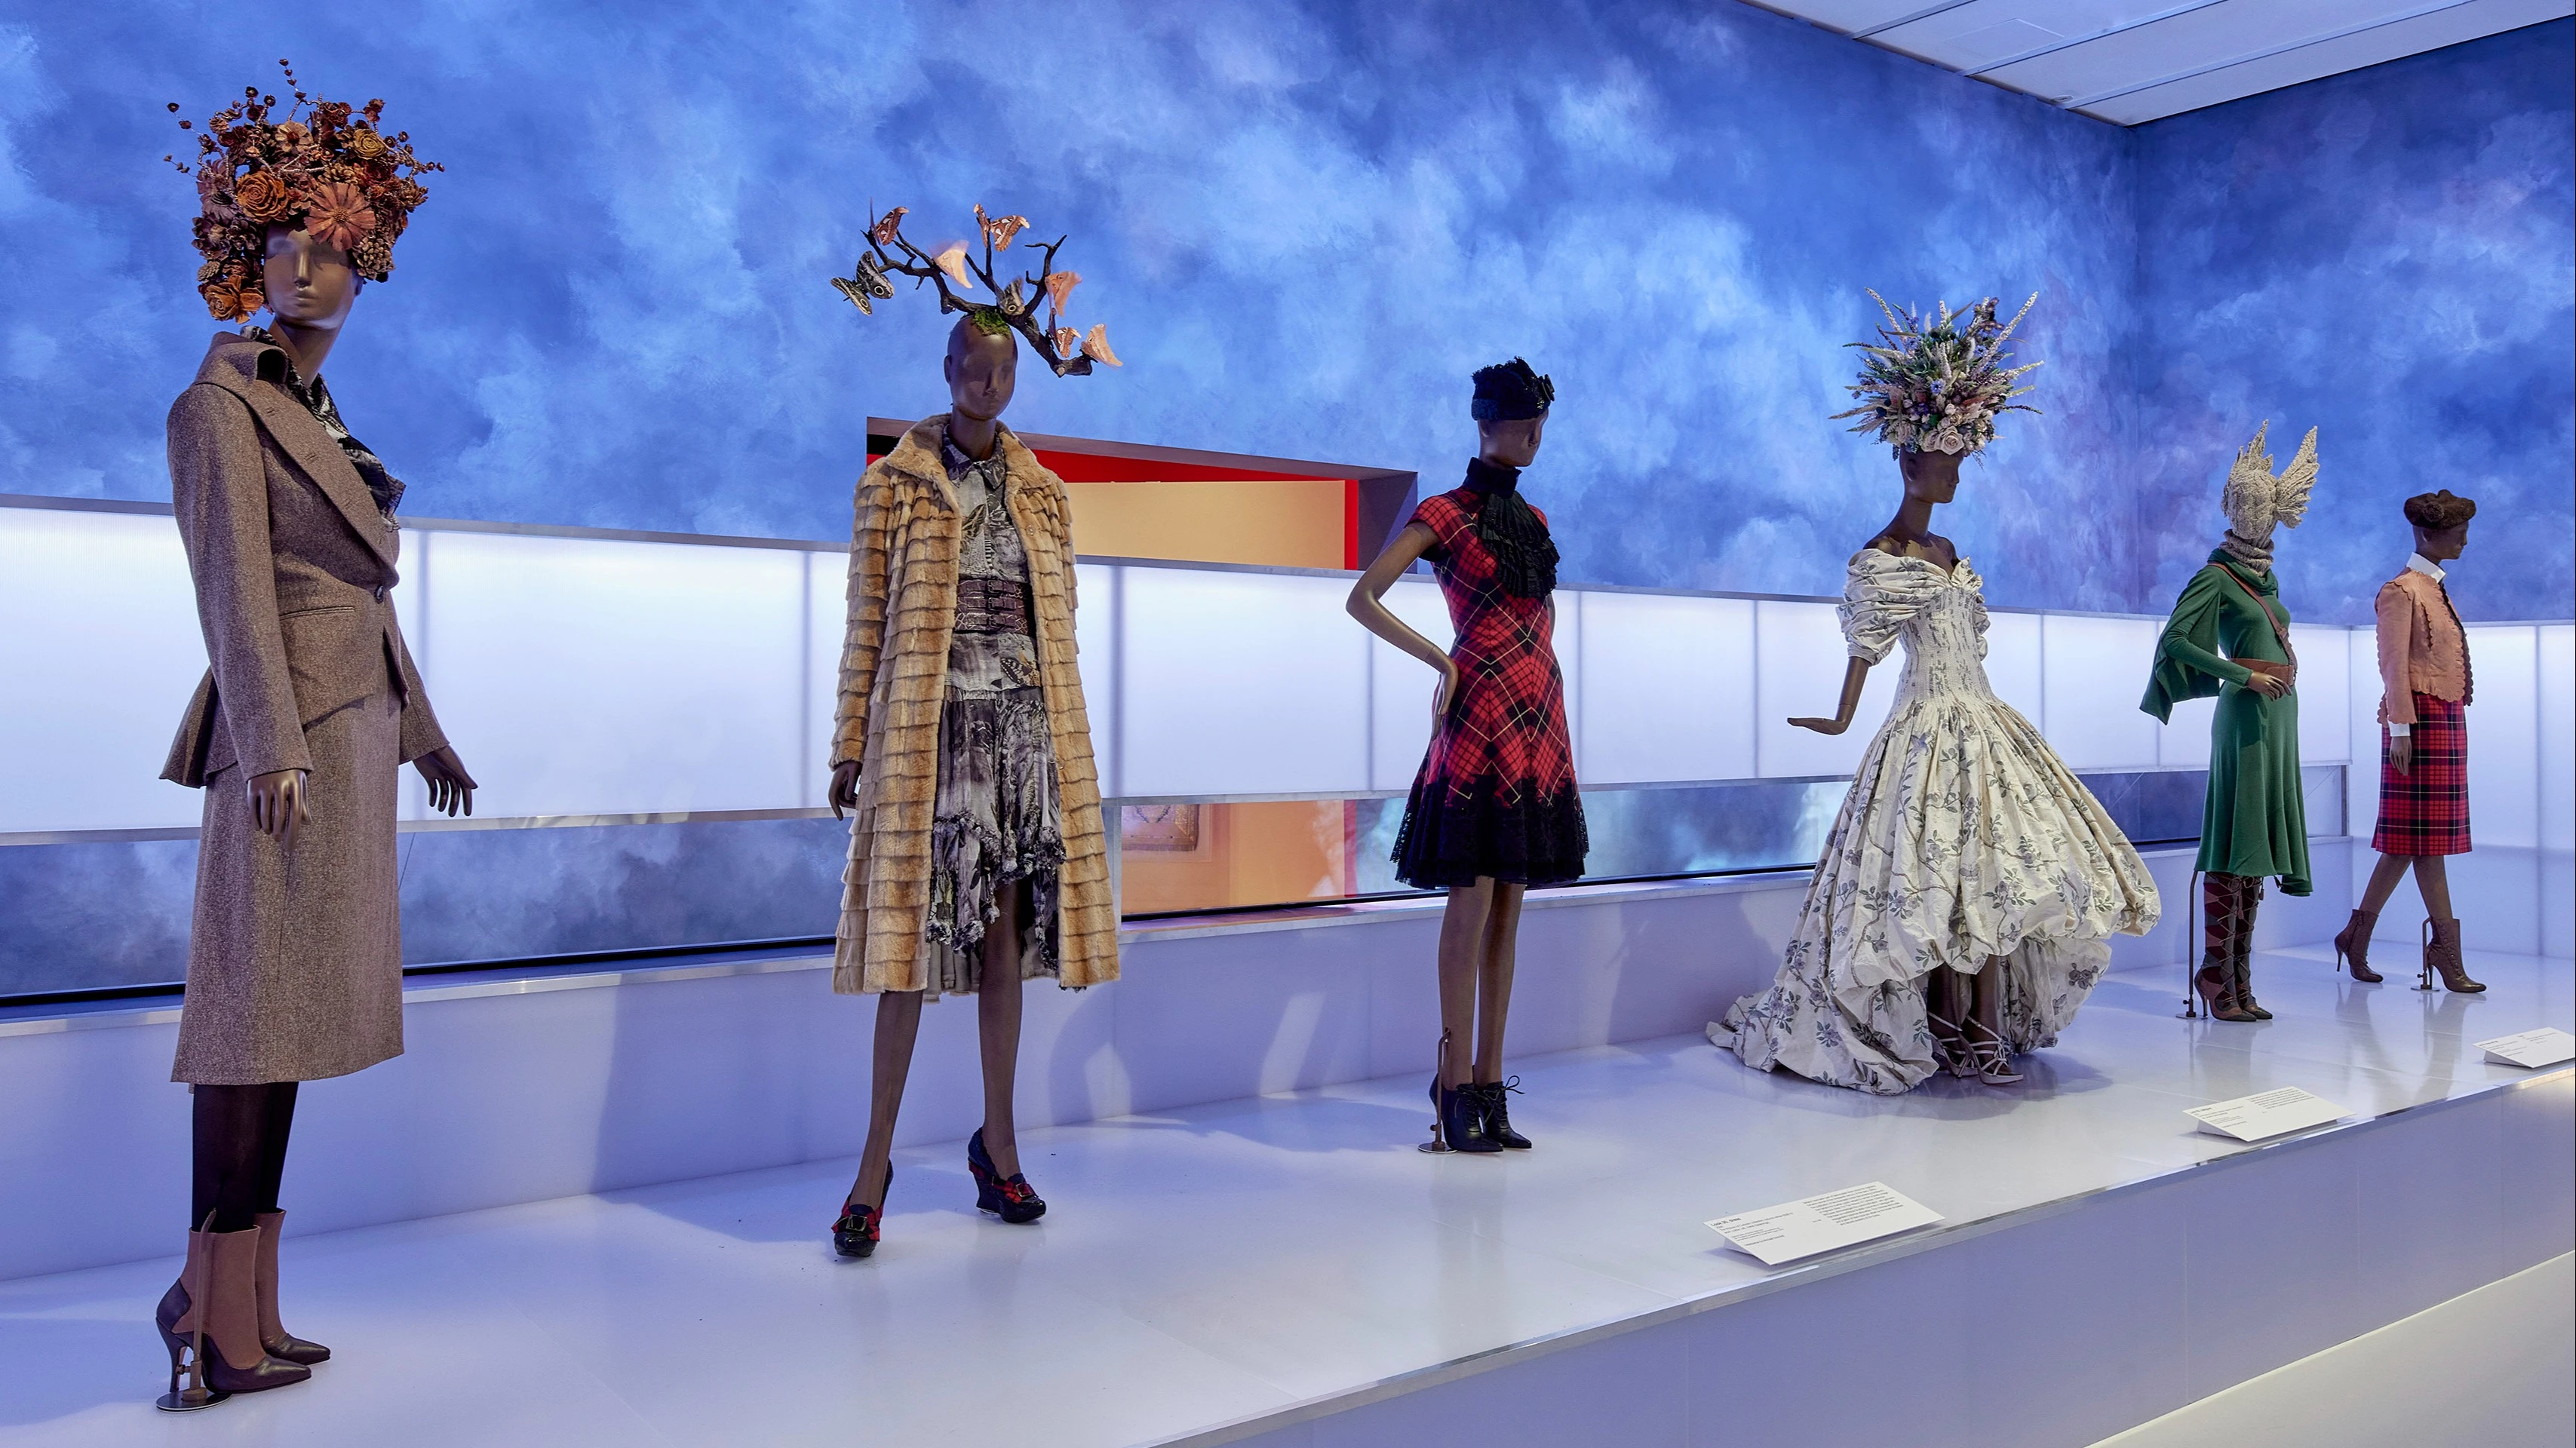 Installation view of Alexander McQueen: Mind, Mythos, Muse on display at NGV International from 11 December 2022 - 16 April 2023.
Photo: Tom Ross